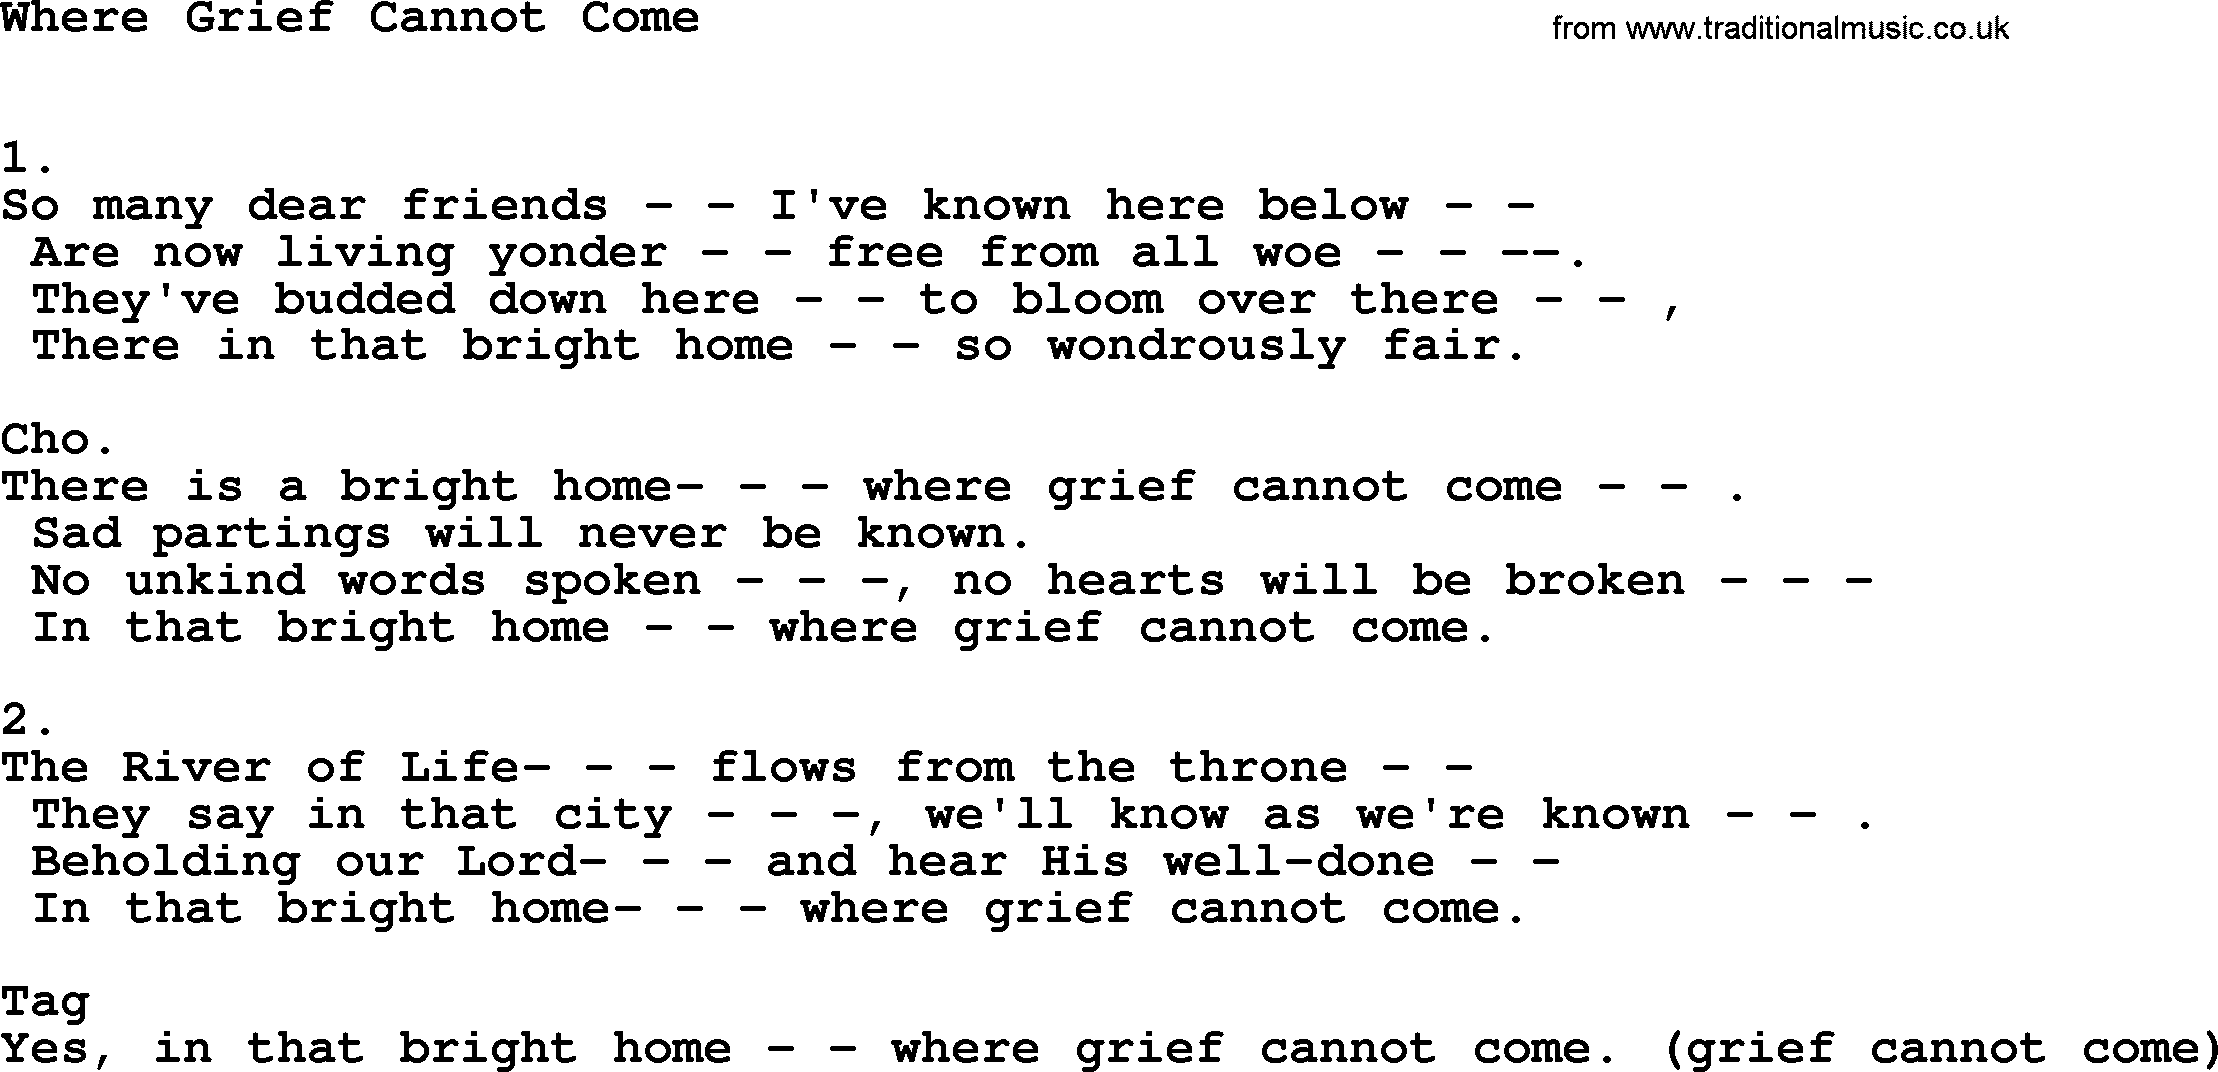 Apostolic & Pentecostal Hymns and Songs, Hymn: Where Grief Cannot Come lyrics and PDF